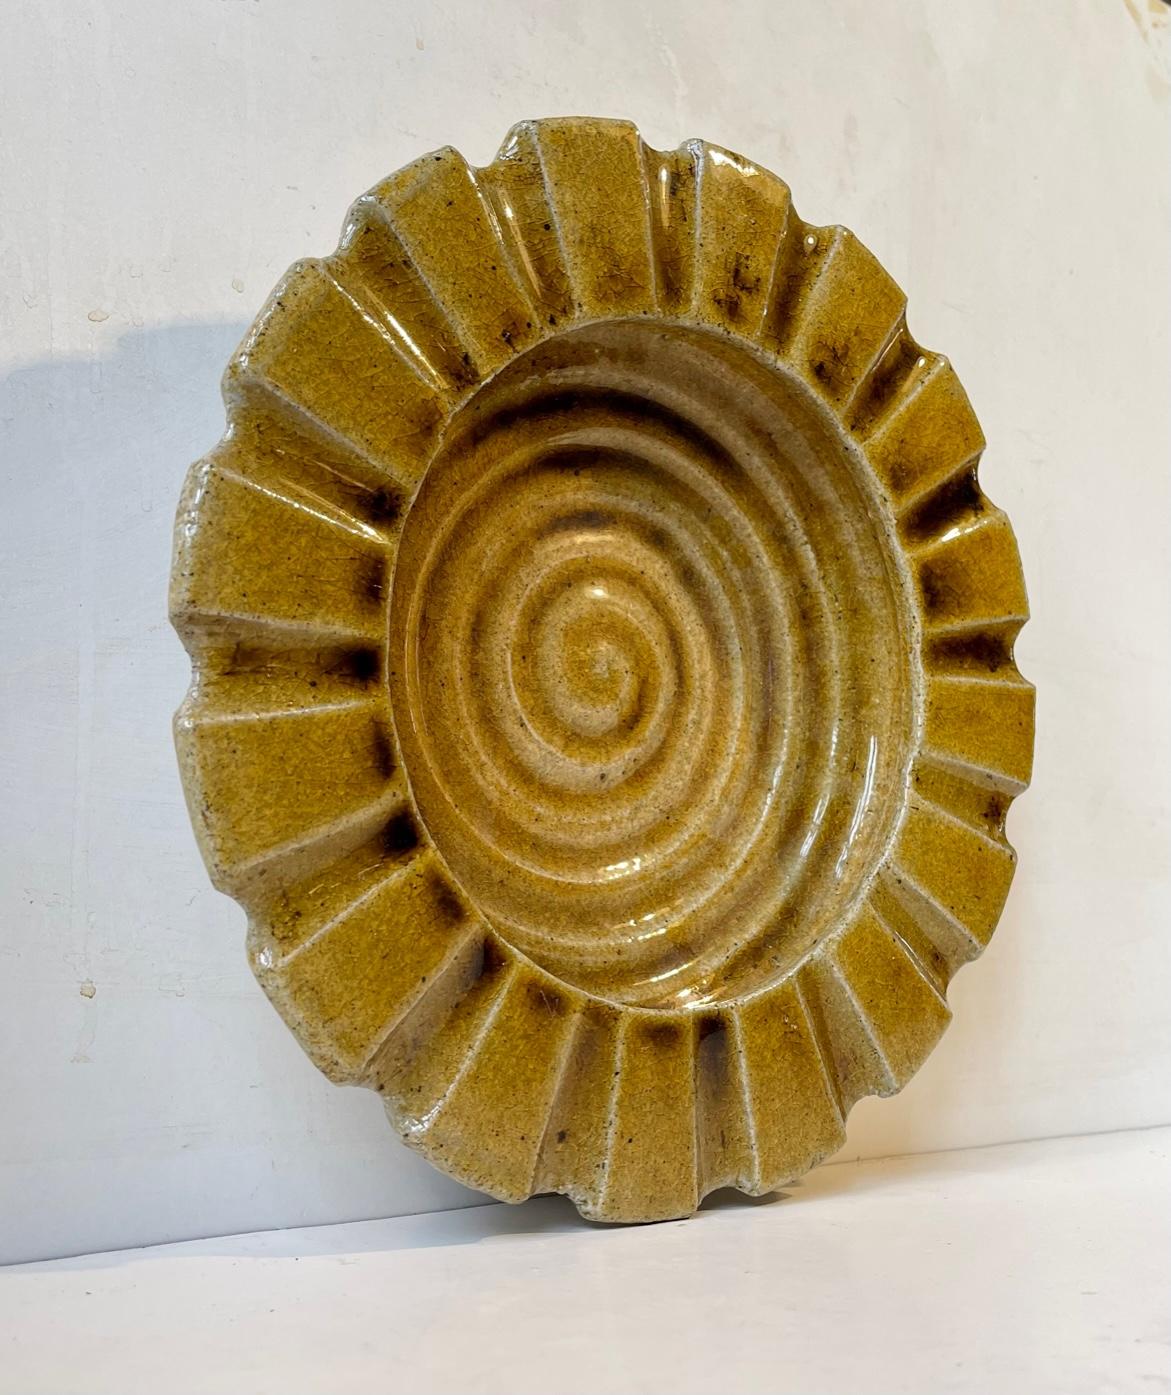 A rare stoneware bowl executed with wide ribbings and core yellow glaze. Designed by Danish Ceramist Hjalmar Møller and made at Kähler during the 1930s or 40s. Measurements: D: 27 cm, H: 6 cm. Fully signed and marked to its base.